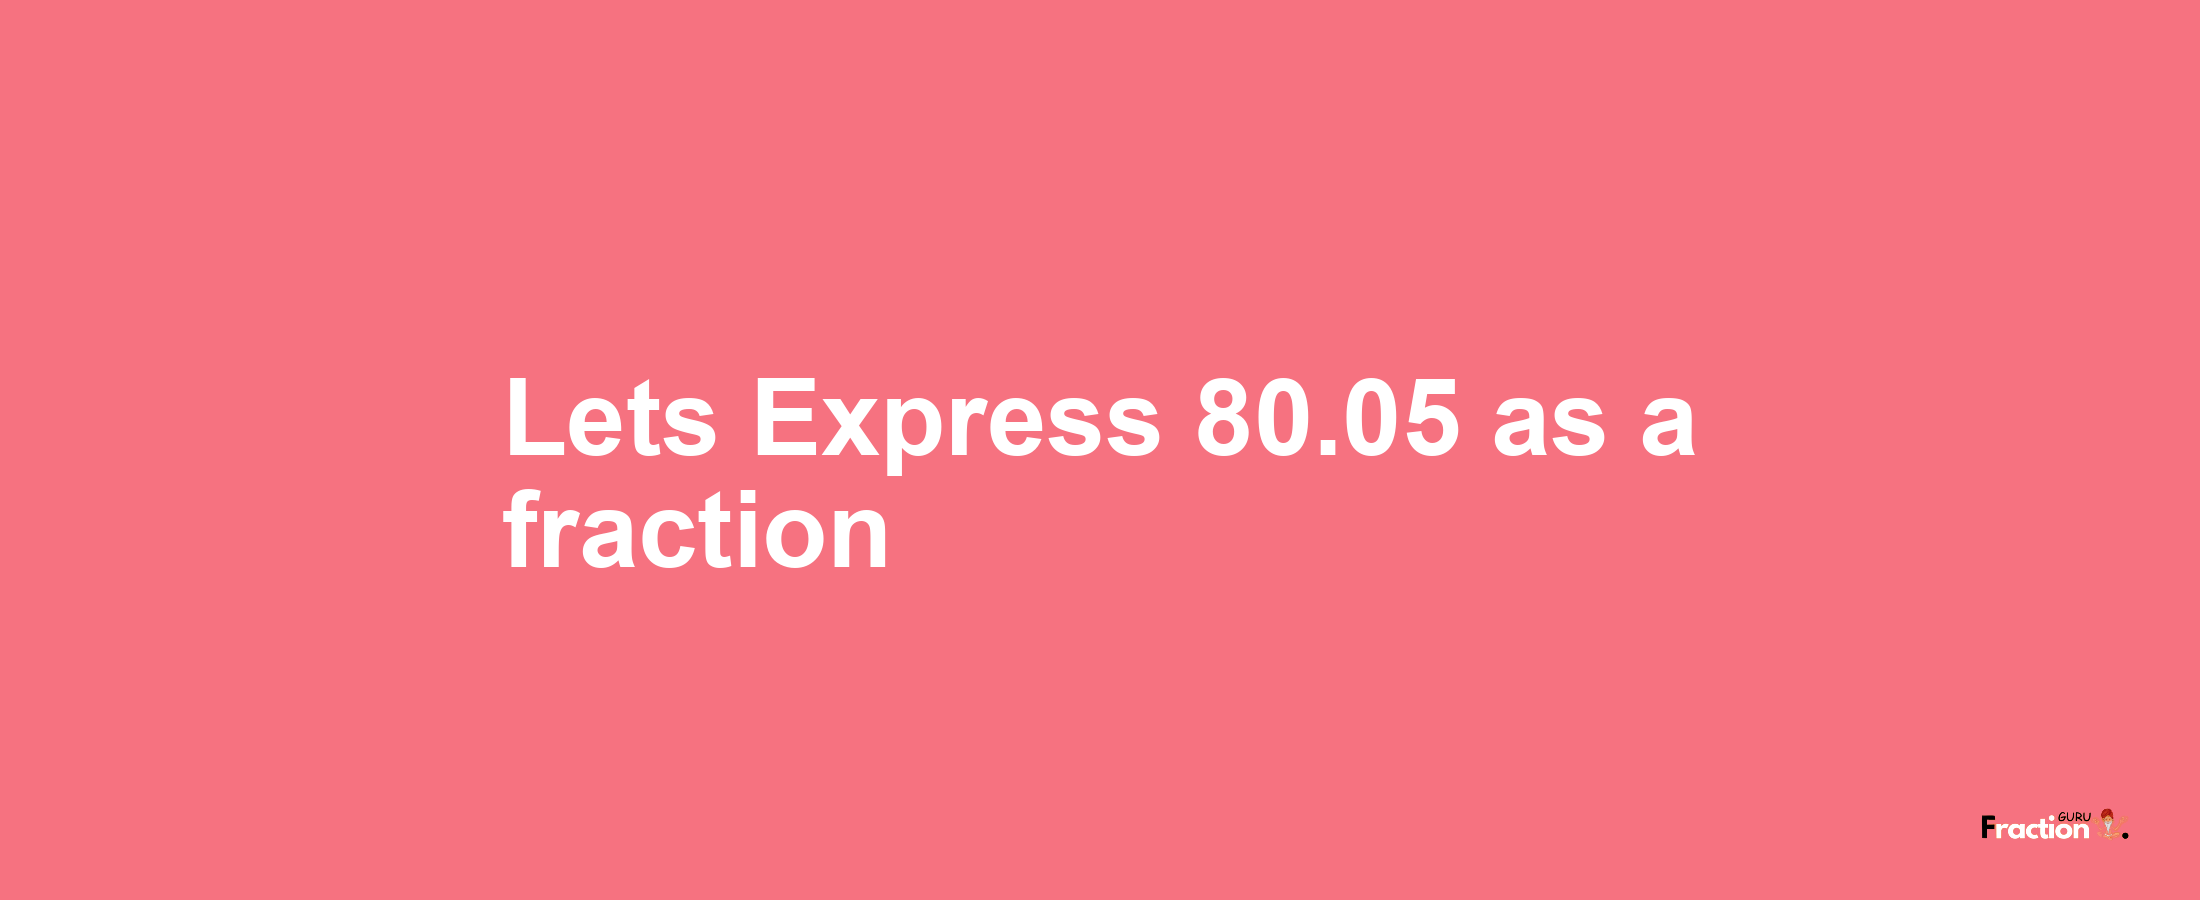 Lets Express 80.05 as afraction